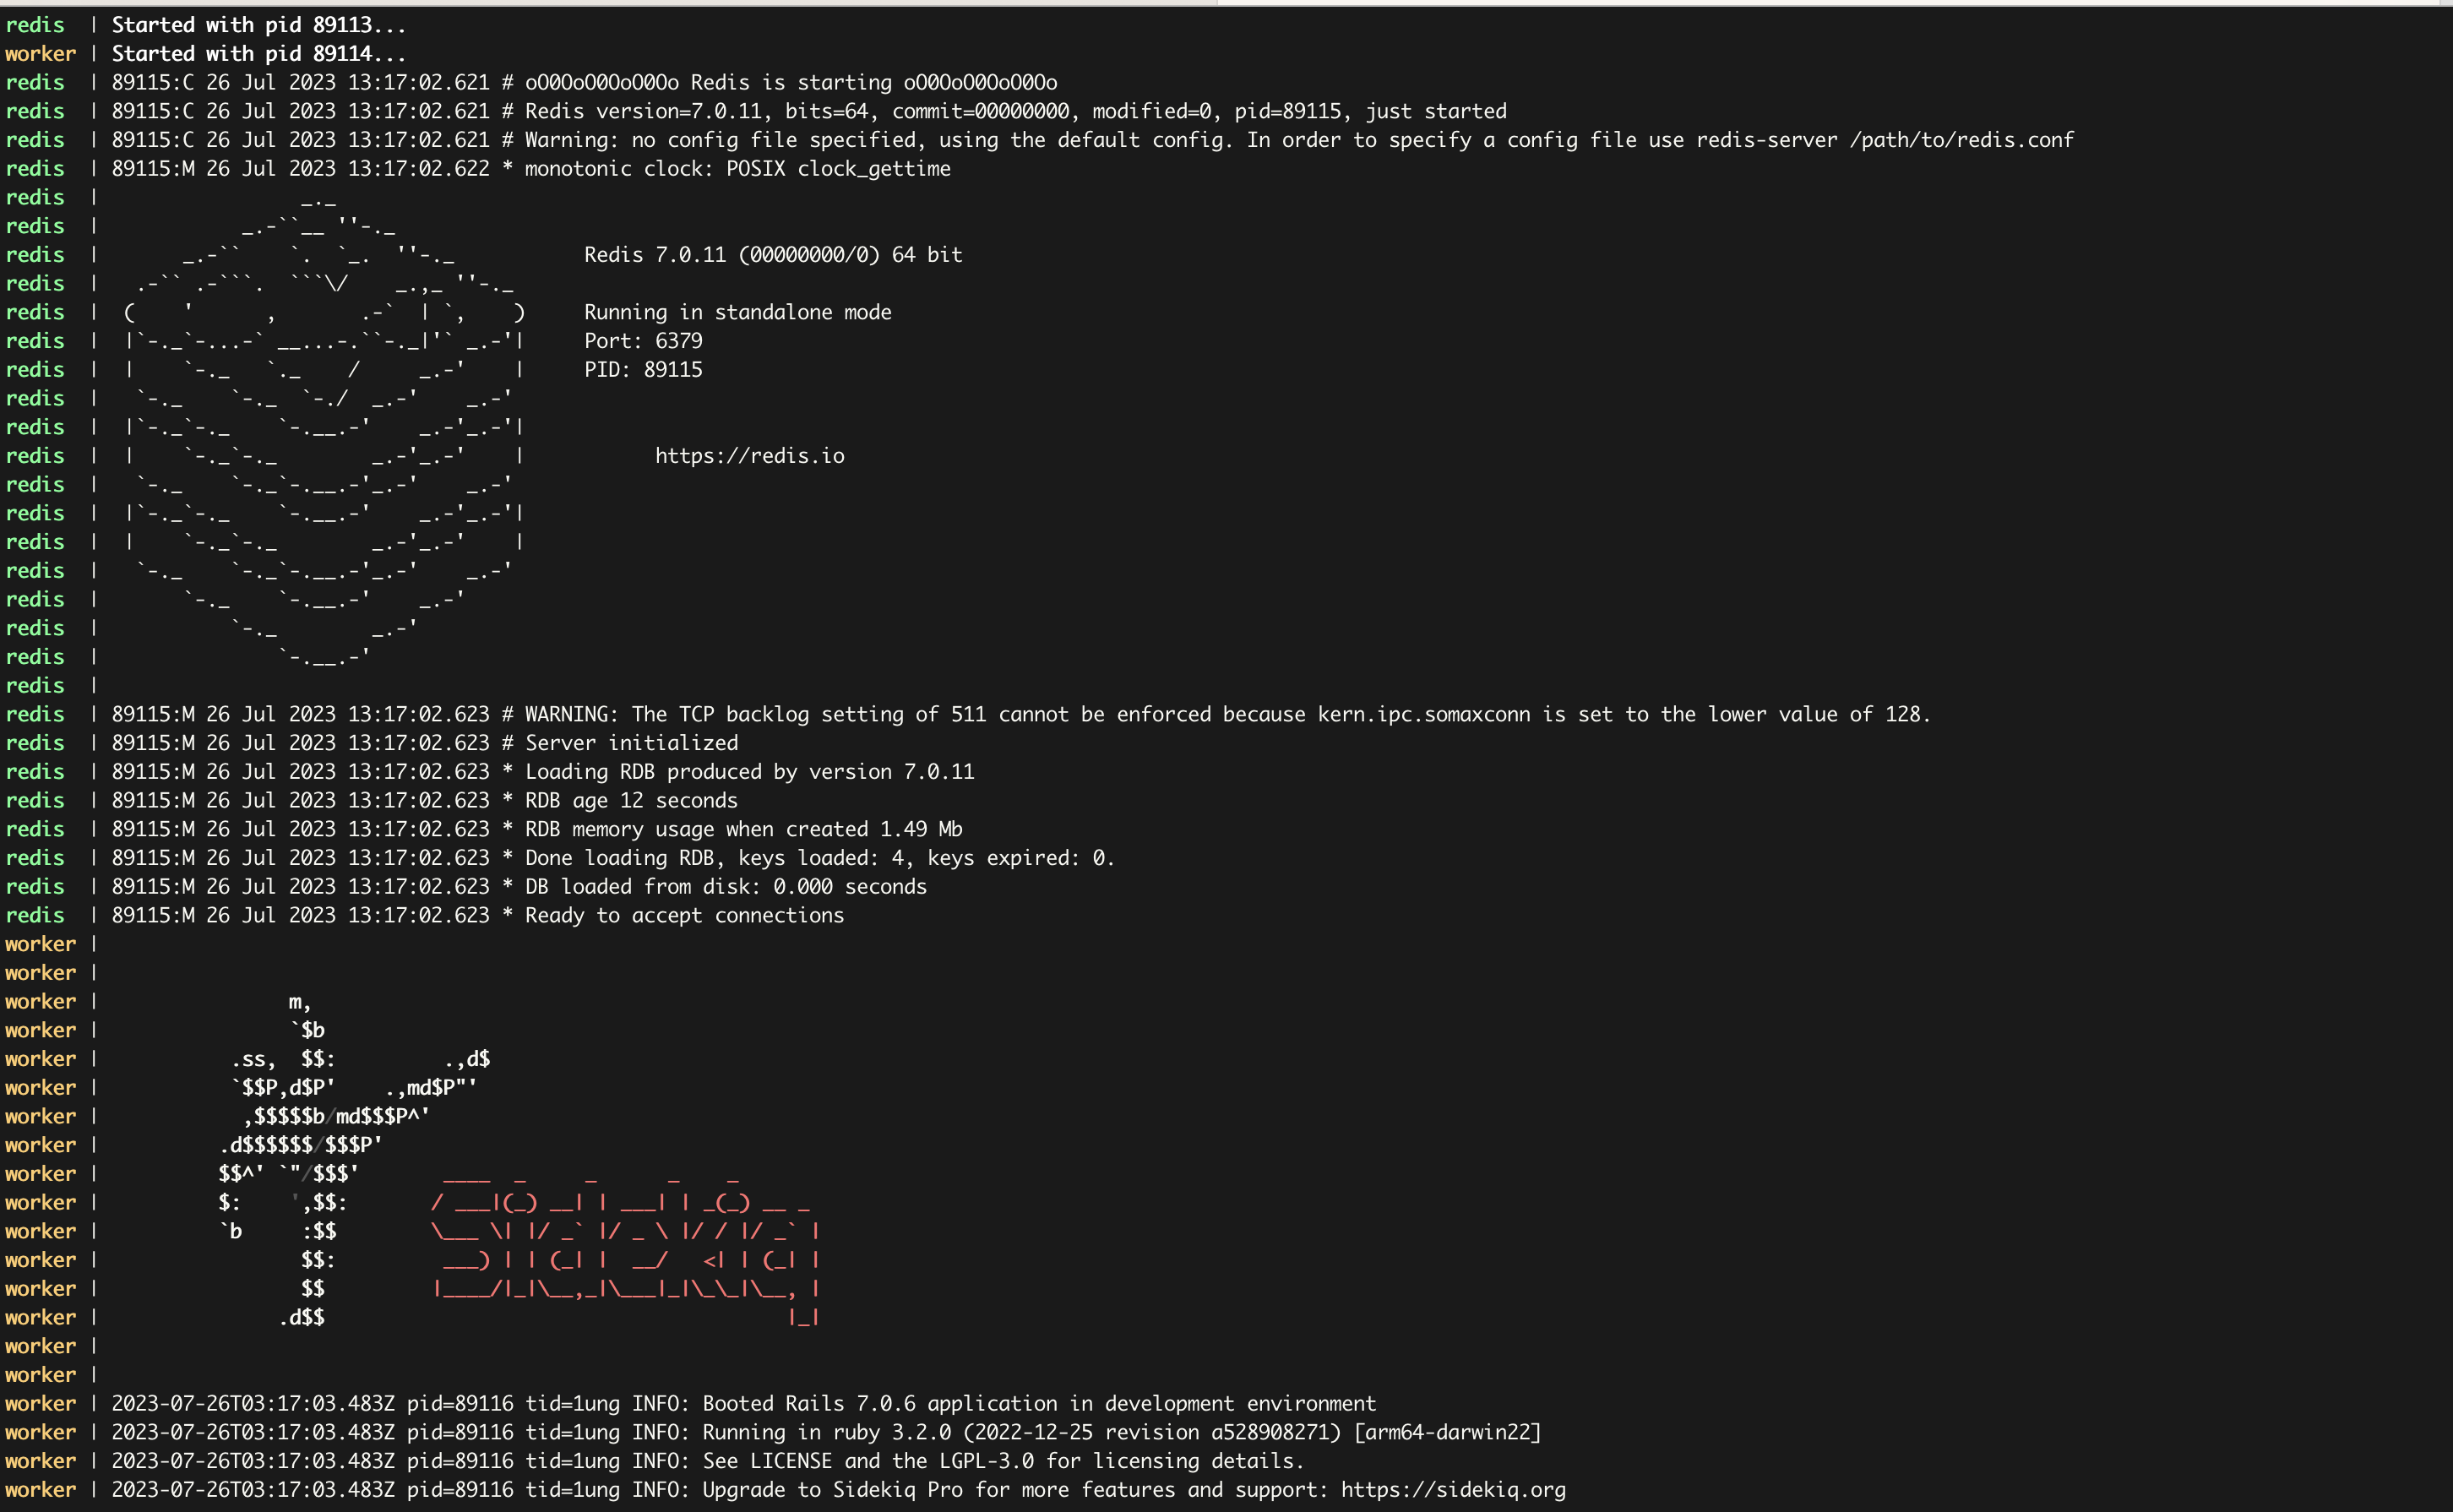 Overmind captures the full process output, so we get to see some pretty ASCII pictures — yay!